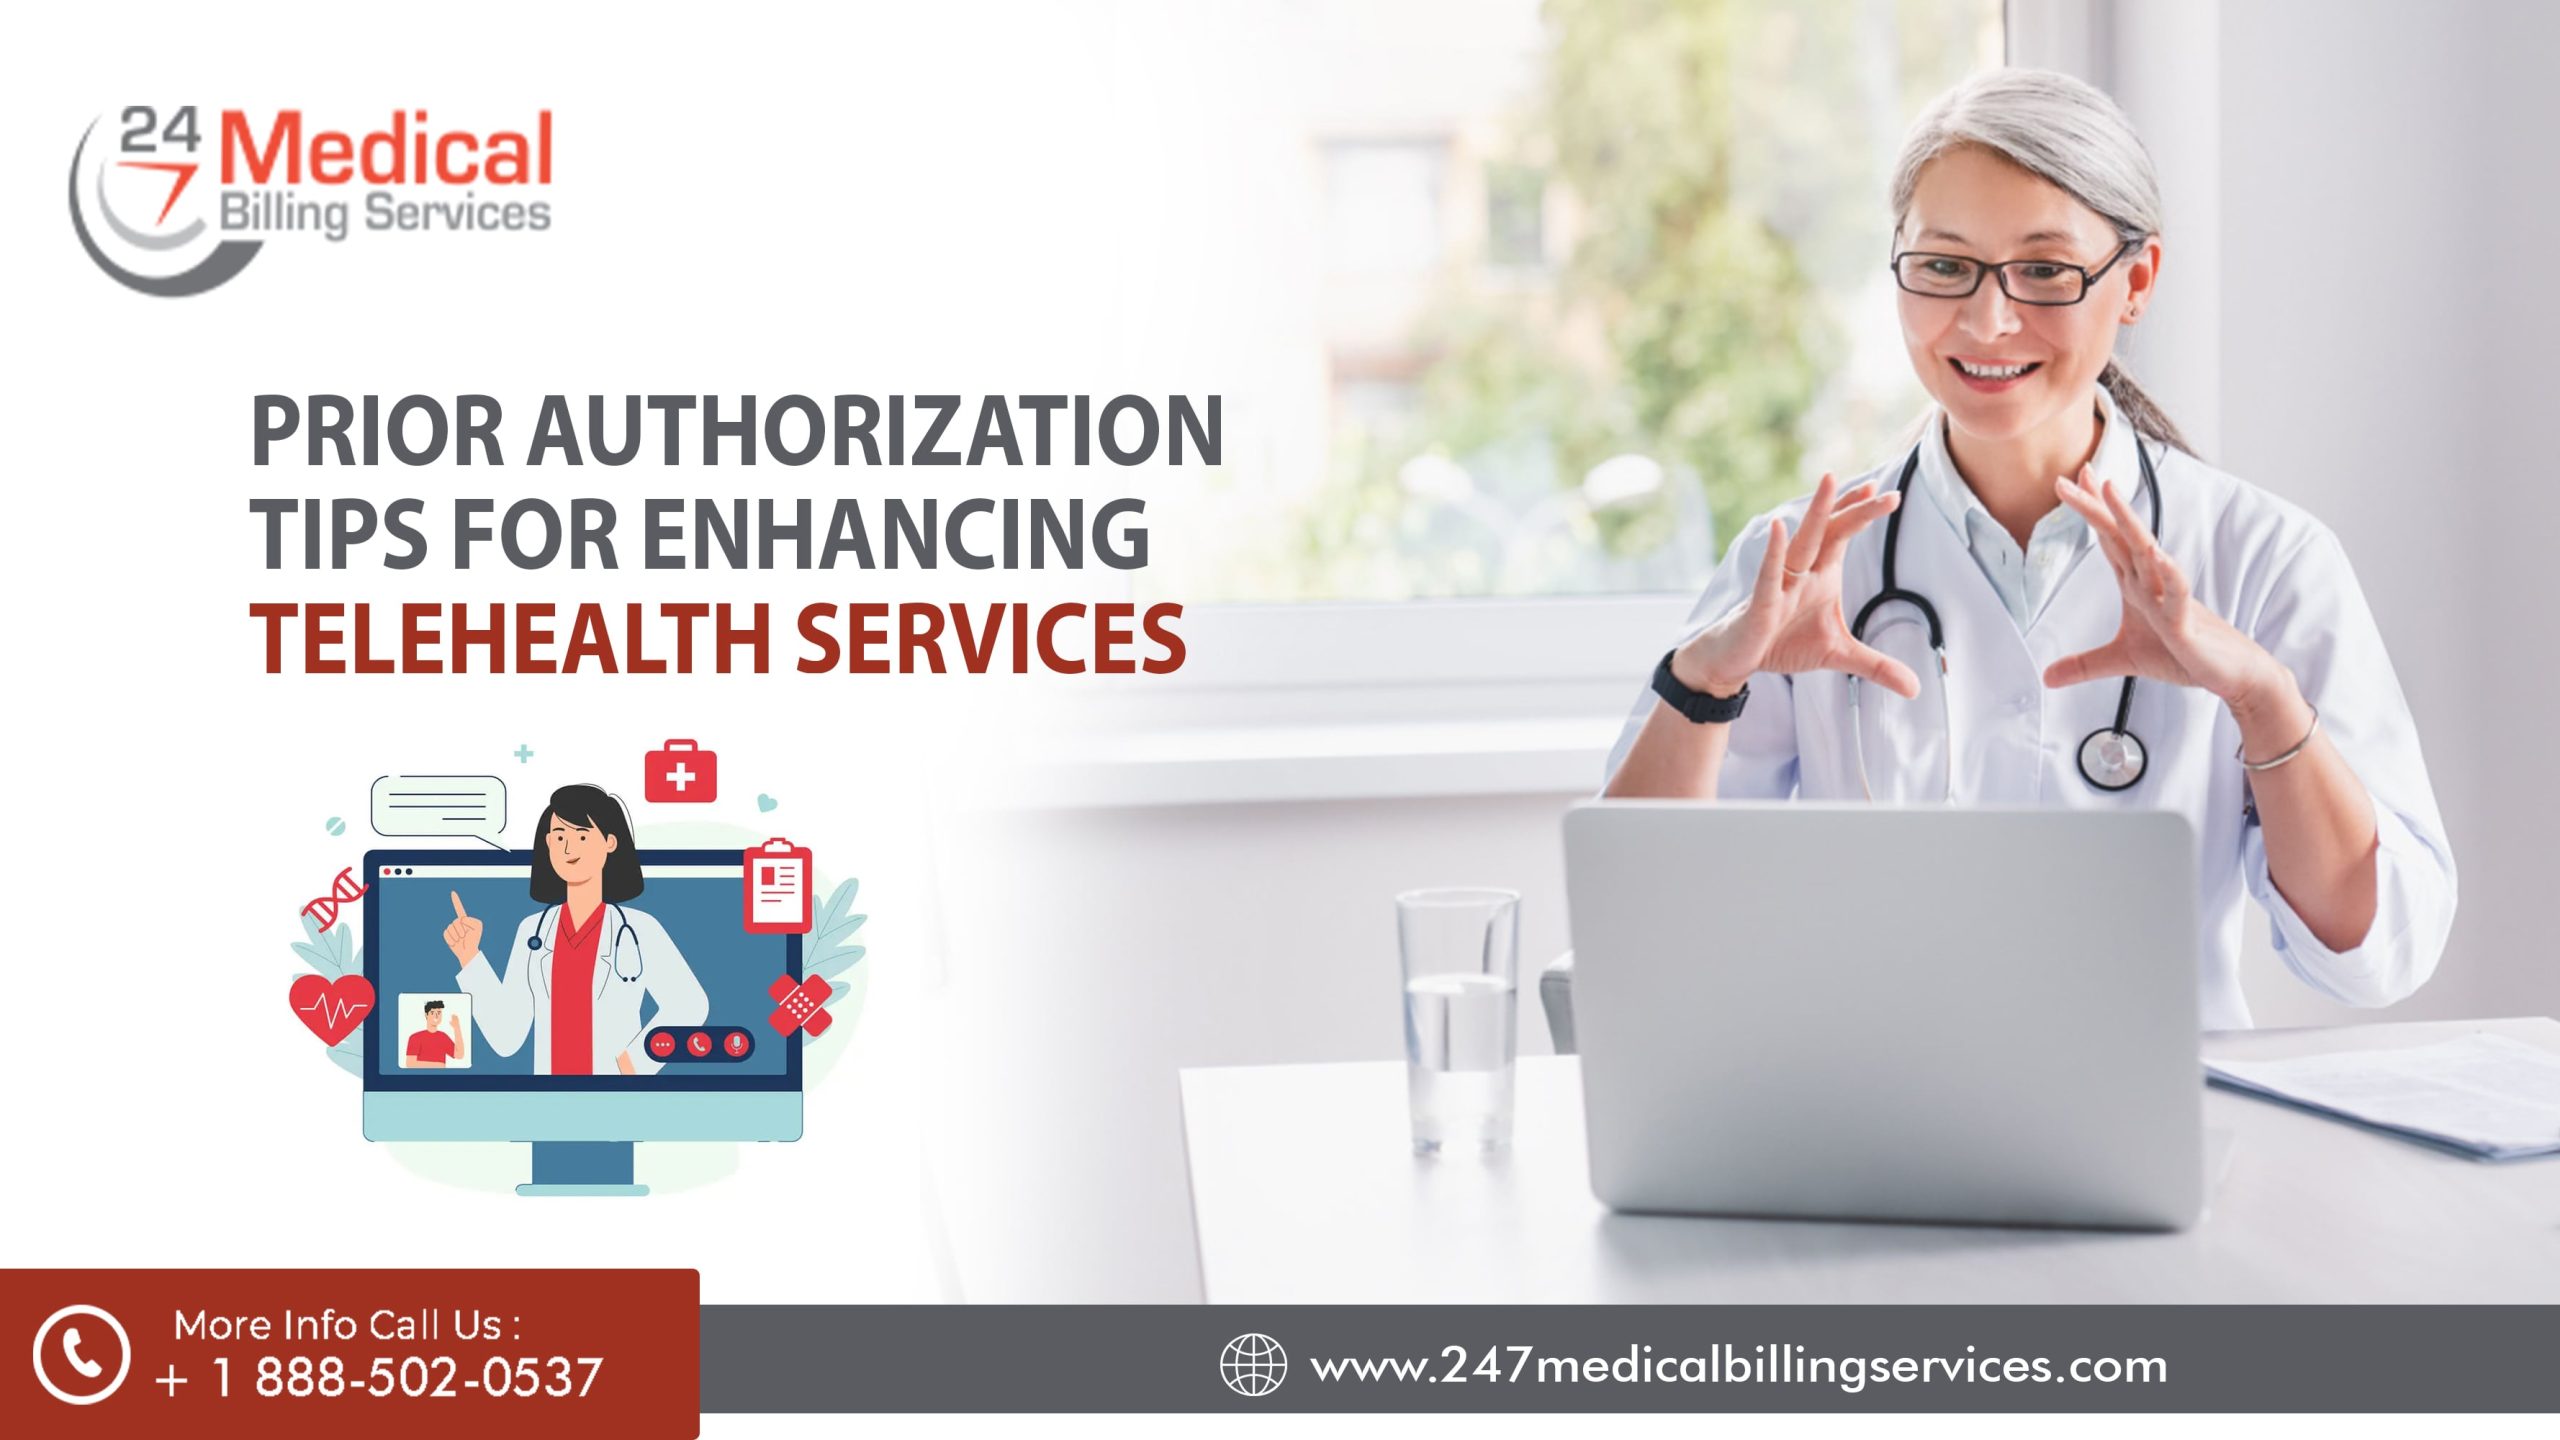  Prior Authorization Tips for Enhancing Telehealth Services